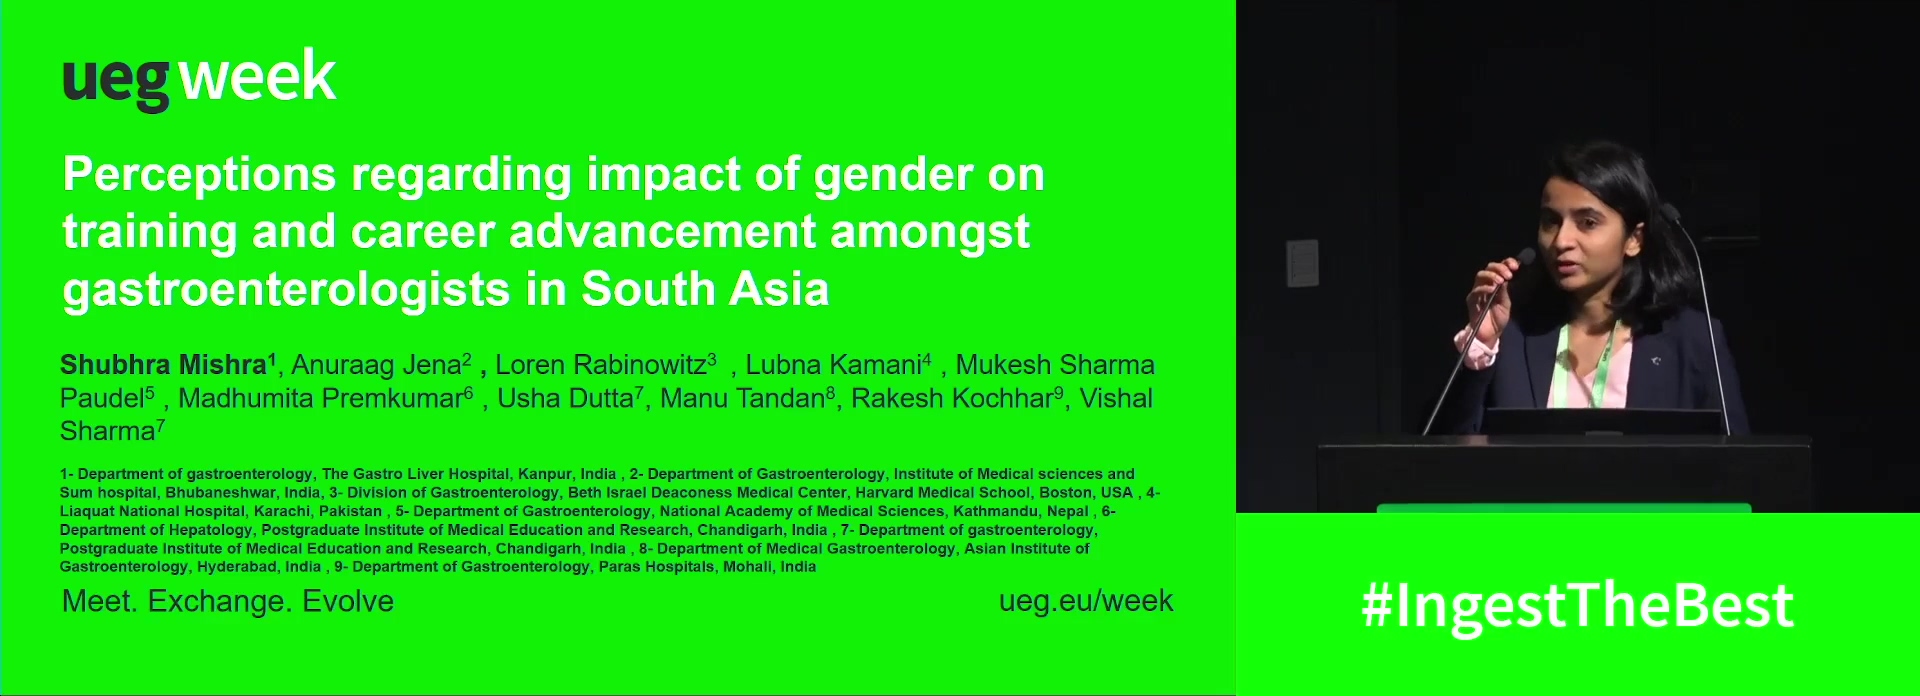 PERCEPTIONS REGARDING IMPACT OF GENDER ON TRAINING AND CAREER ADVANCEMENT AMONGST SOUTH ASIAN GASTROENTEROLOGISTS